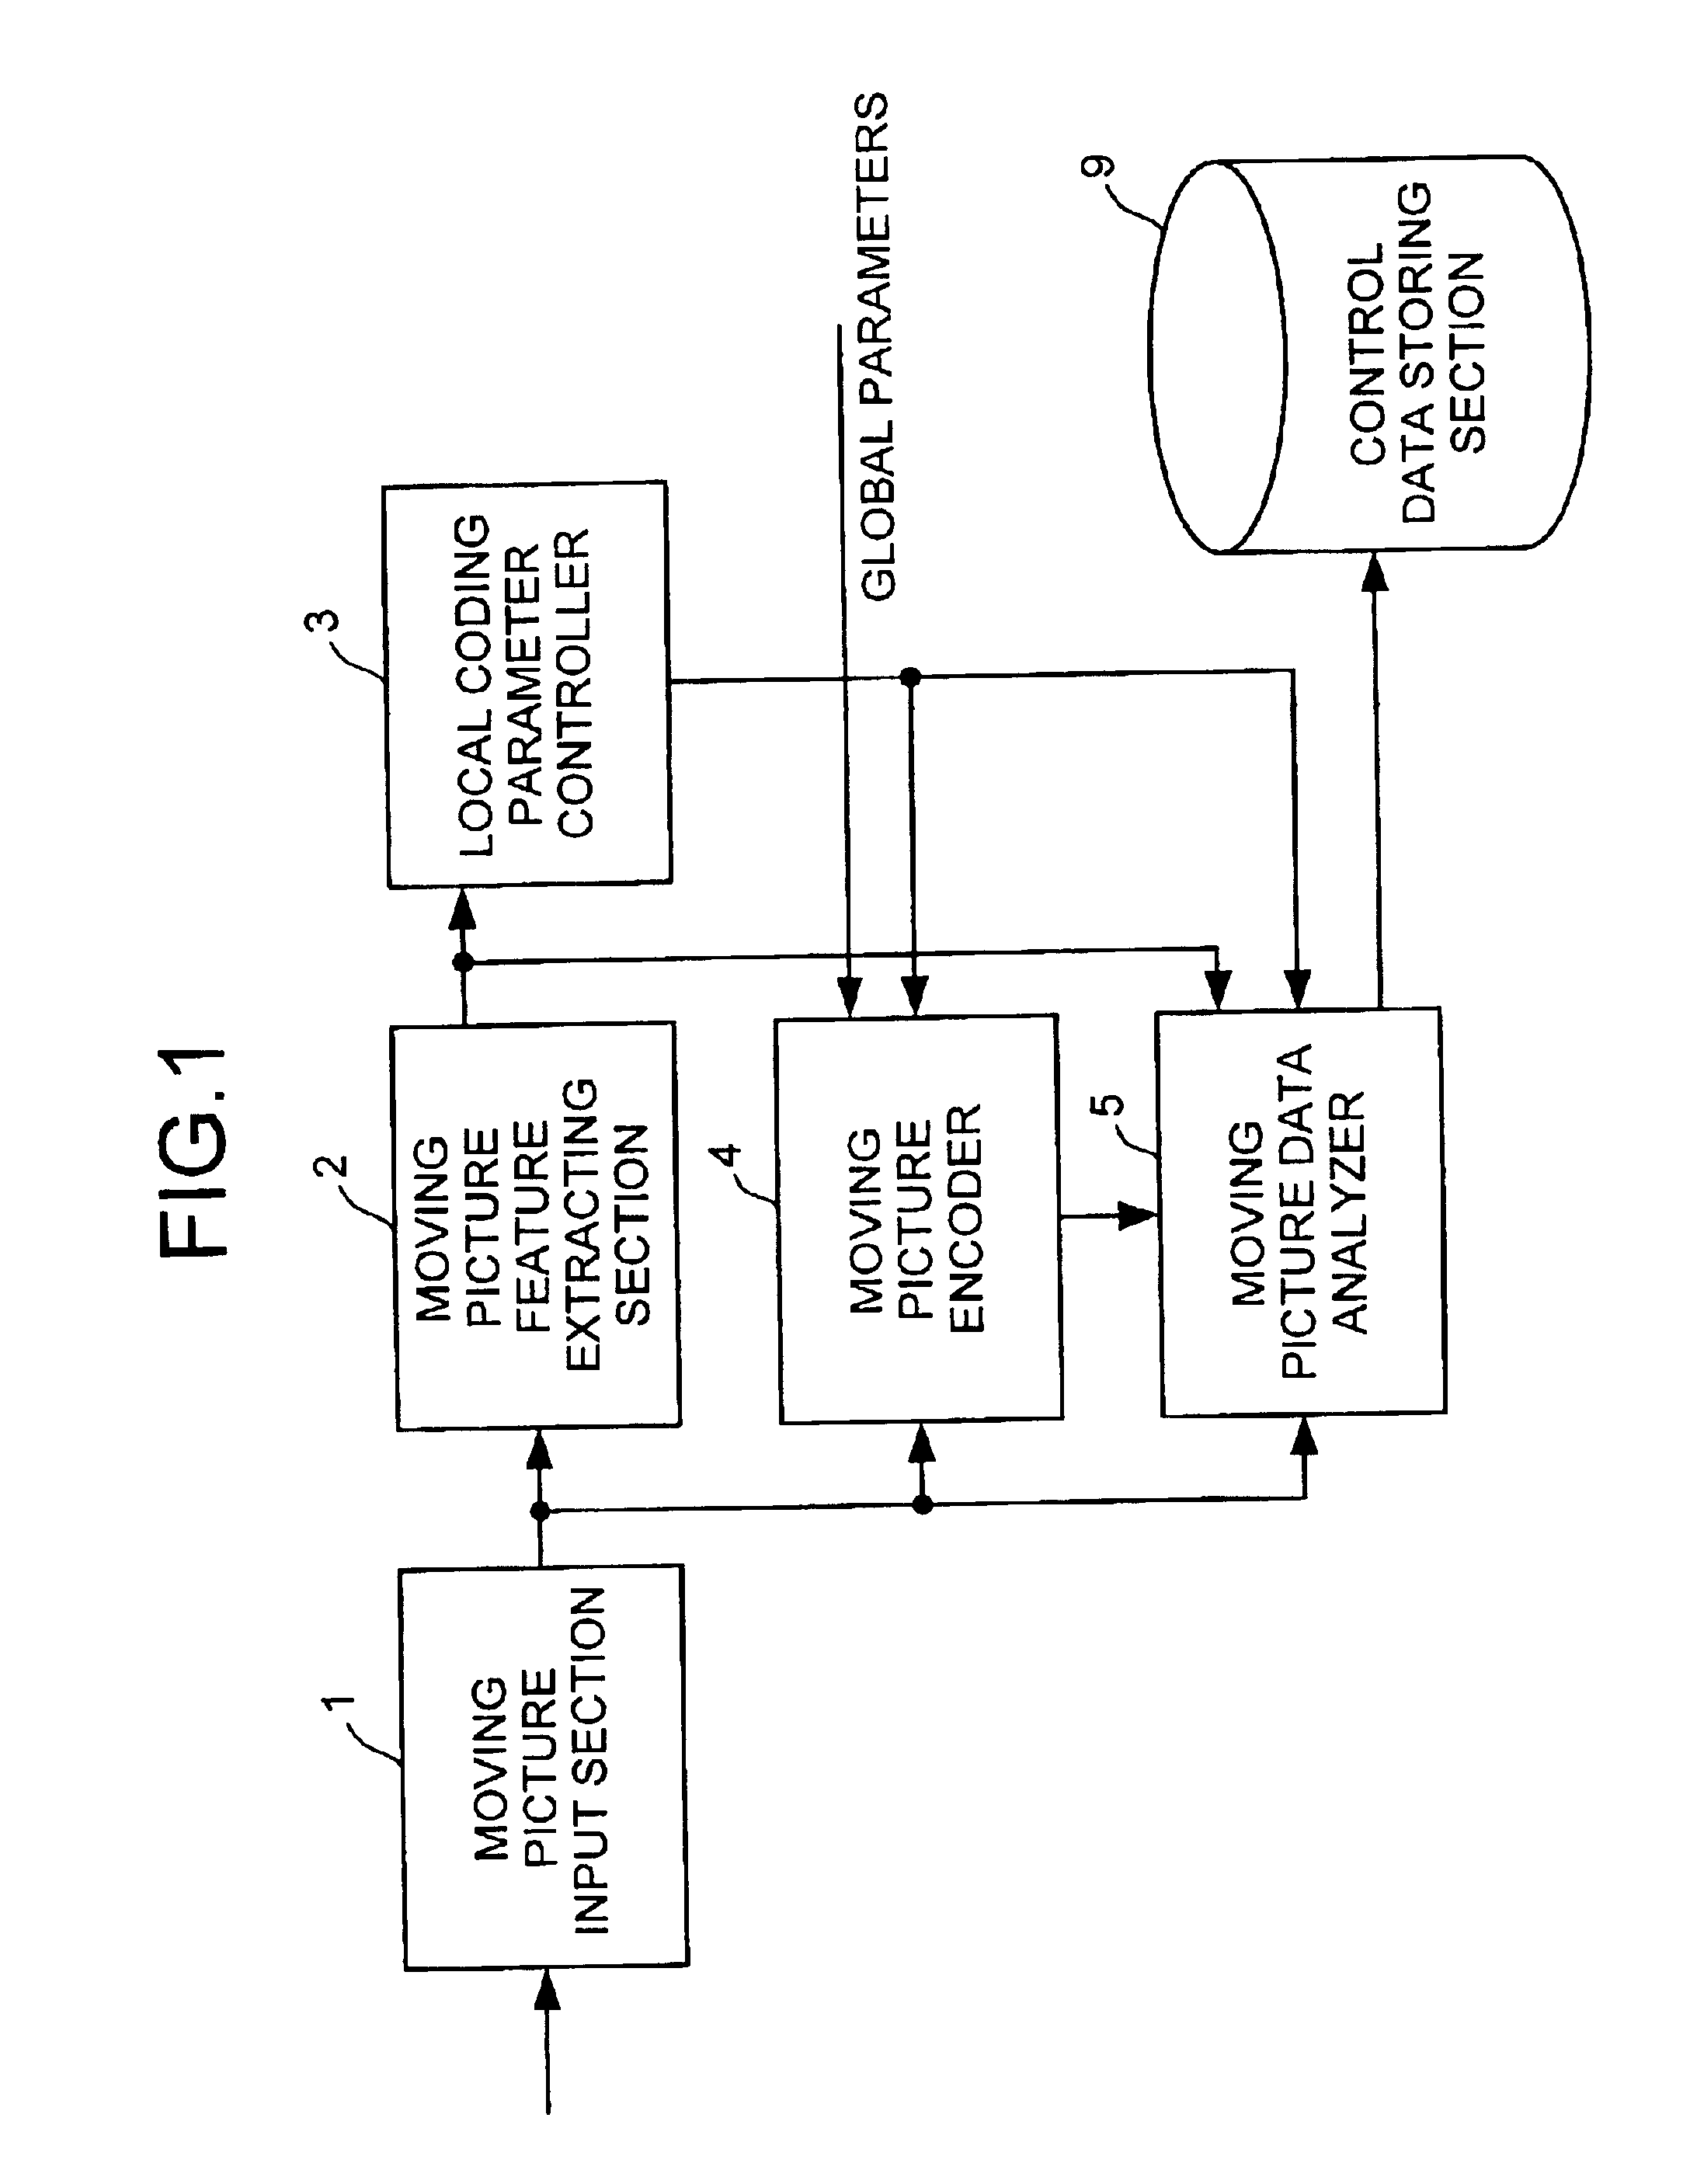 Moving picture coding control apparatus, and coding control database generating apparatus